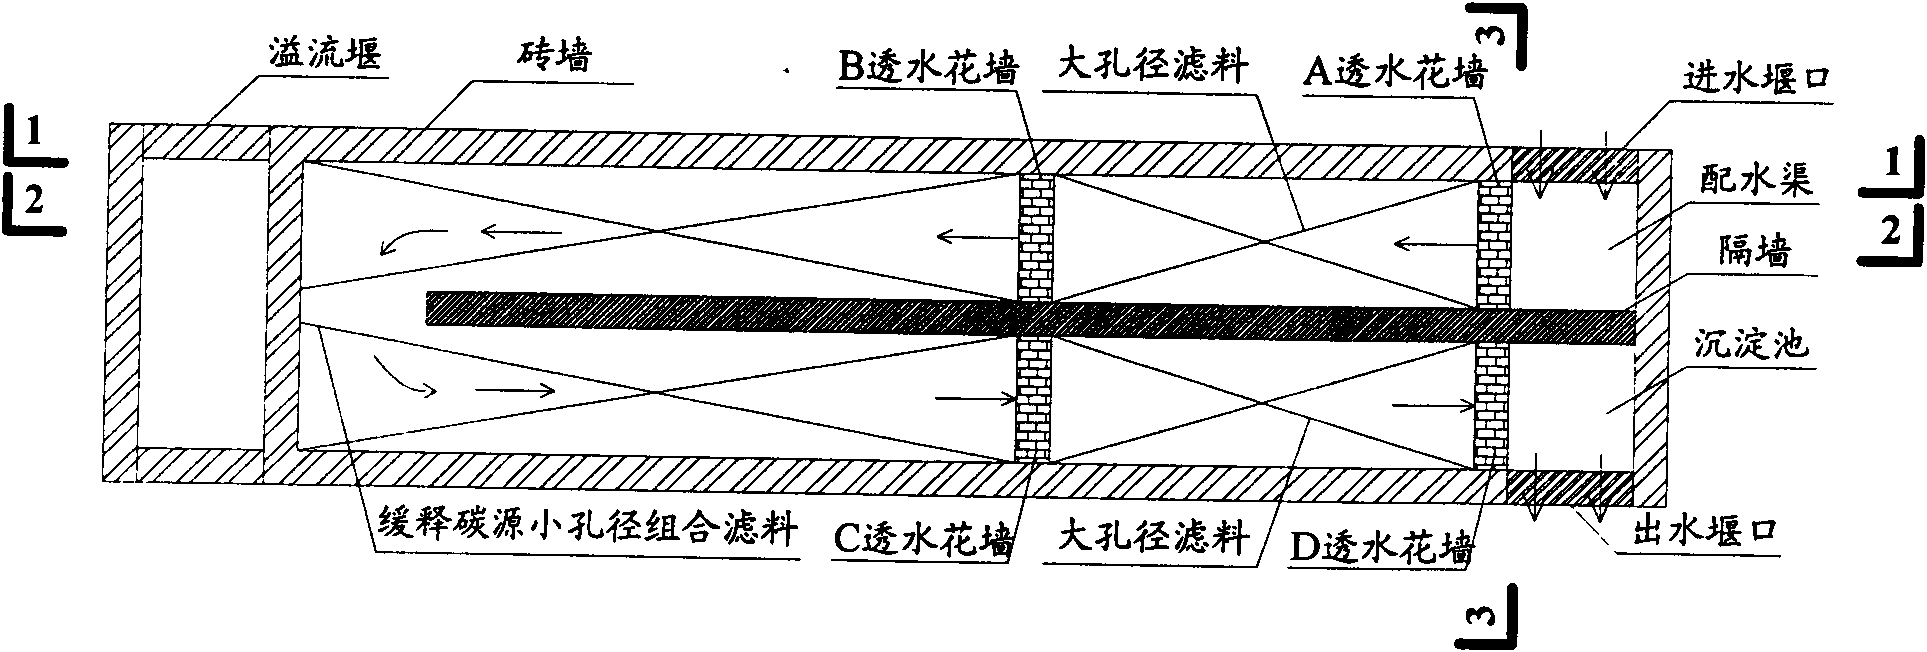 Device and method for denitrifying and dephosphorizing ecological protection multi-level filtration wall in water source area on rural land surface